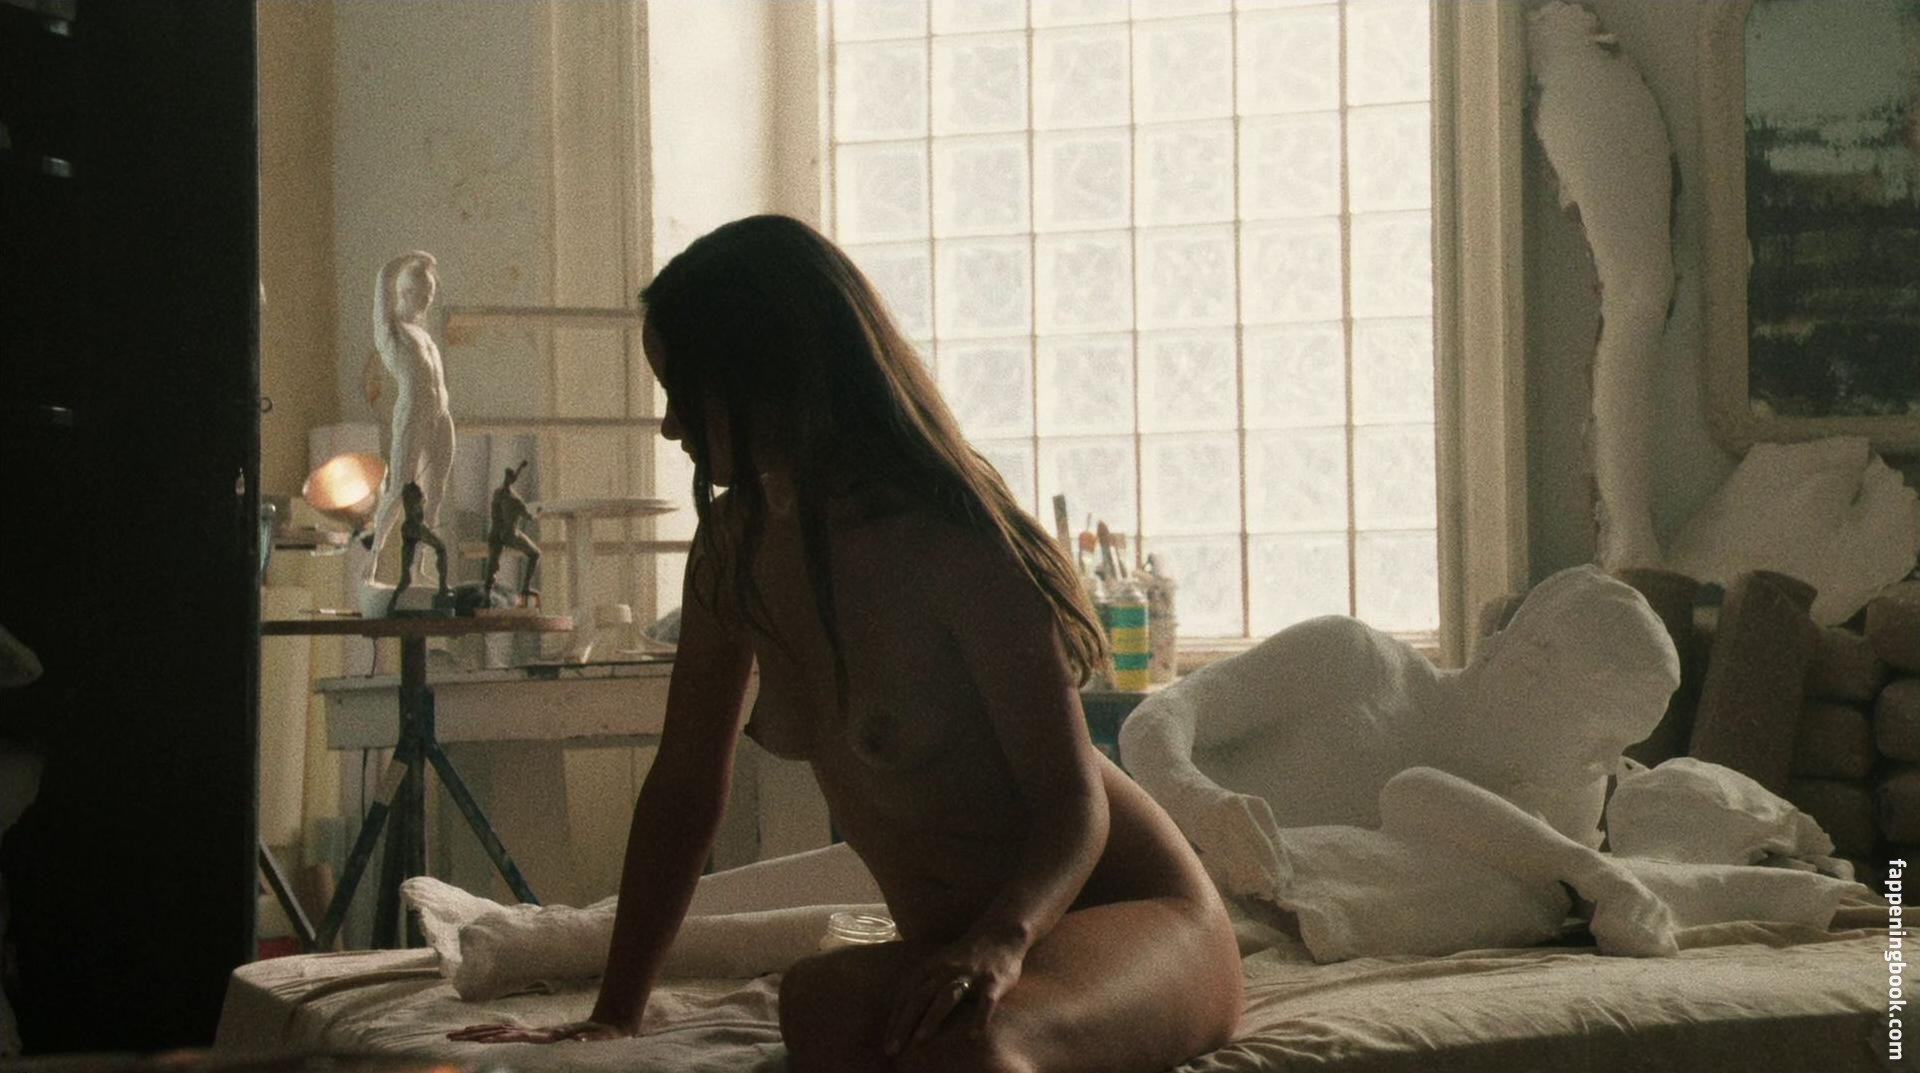 Olivia wilde pussy images